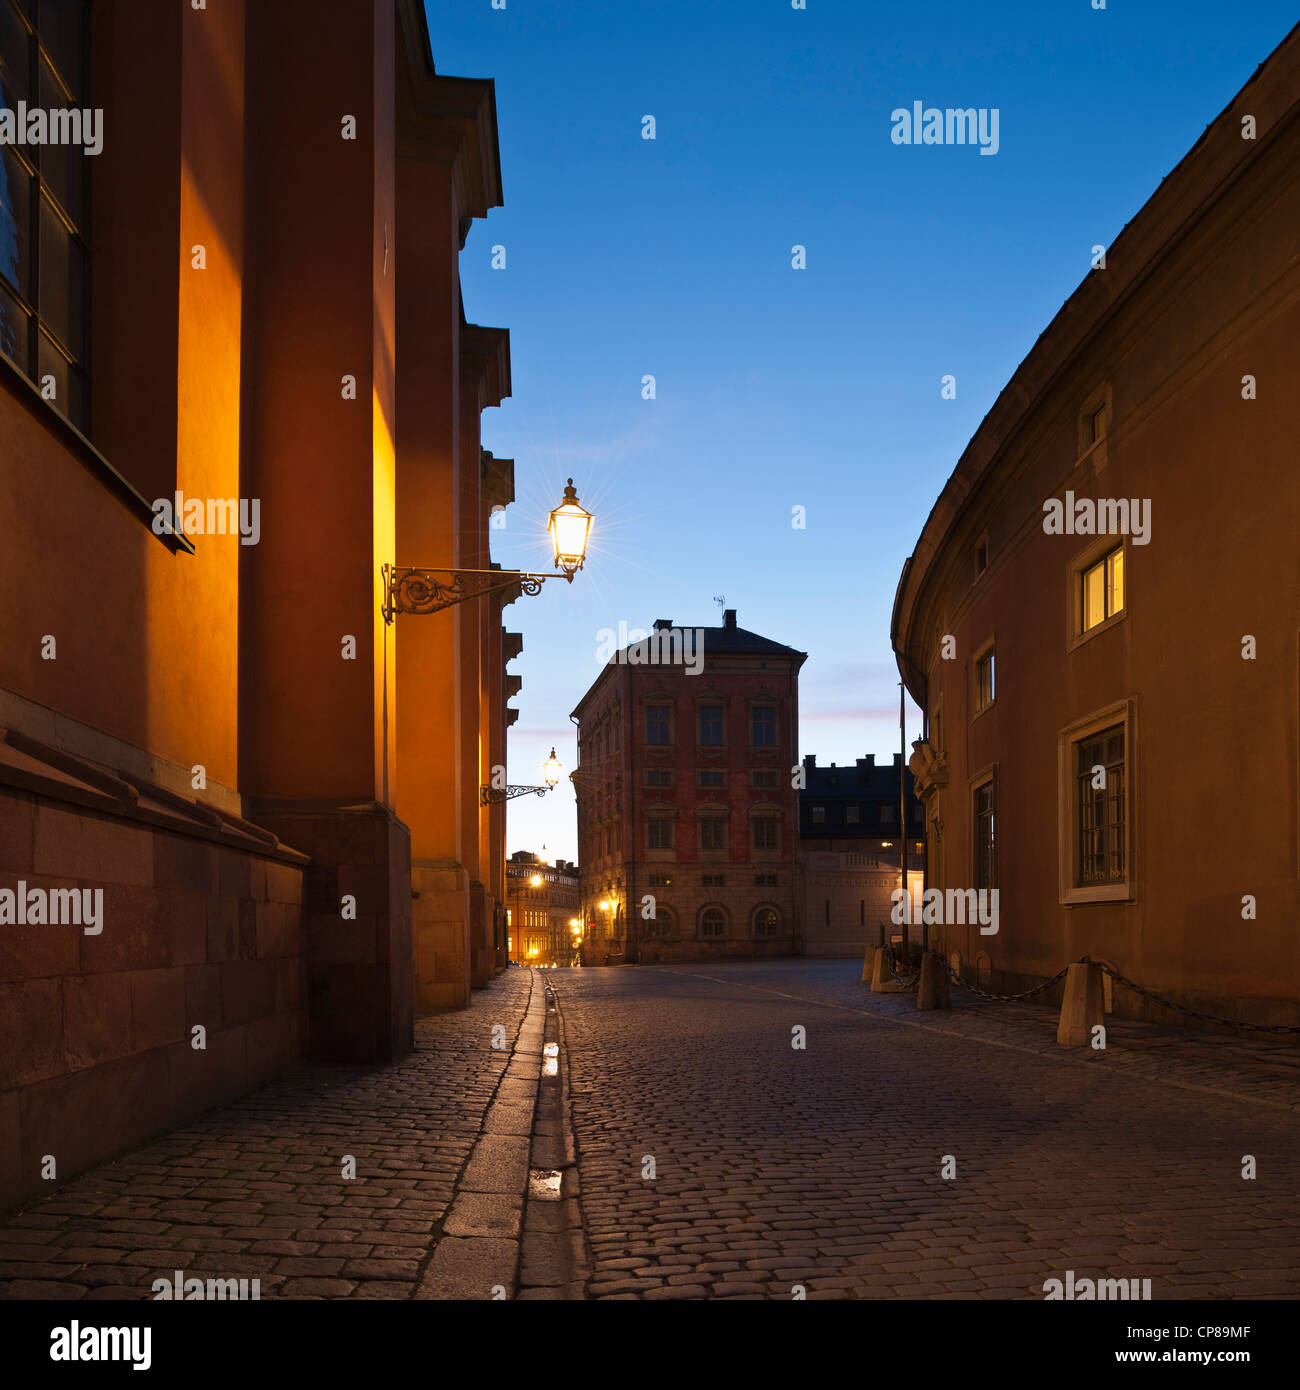 Gamla Stan - old town at night, Stockholm, Sweden Stock Photo